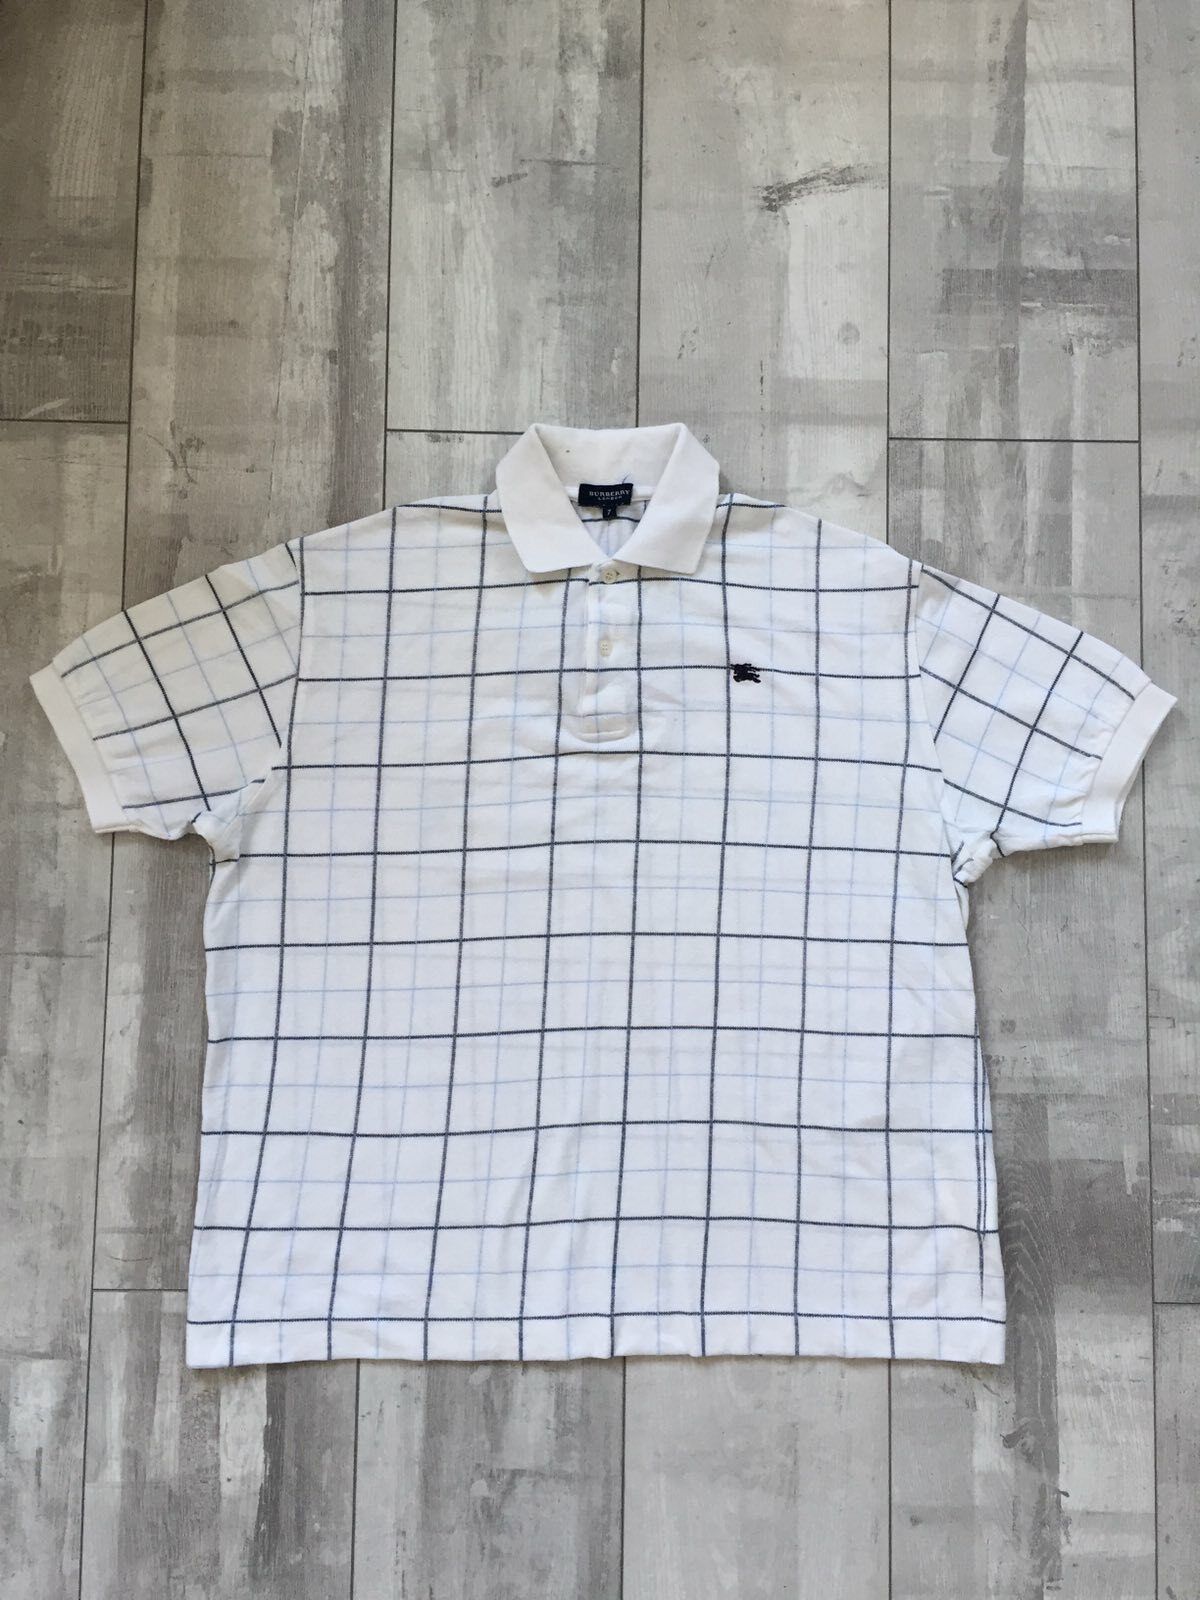 Burberry London Polo T Shirt Men Blue and White Size 7 Good Condition